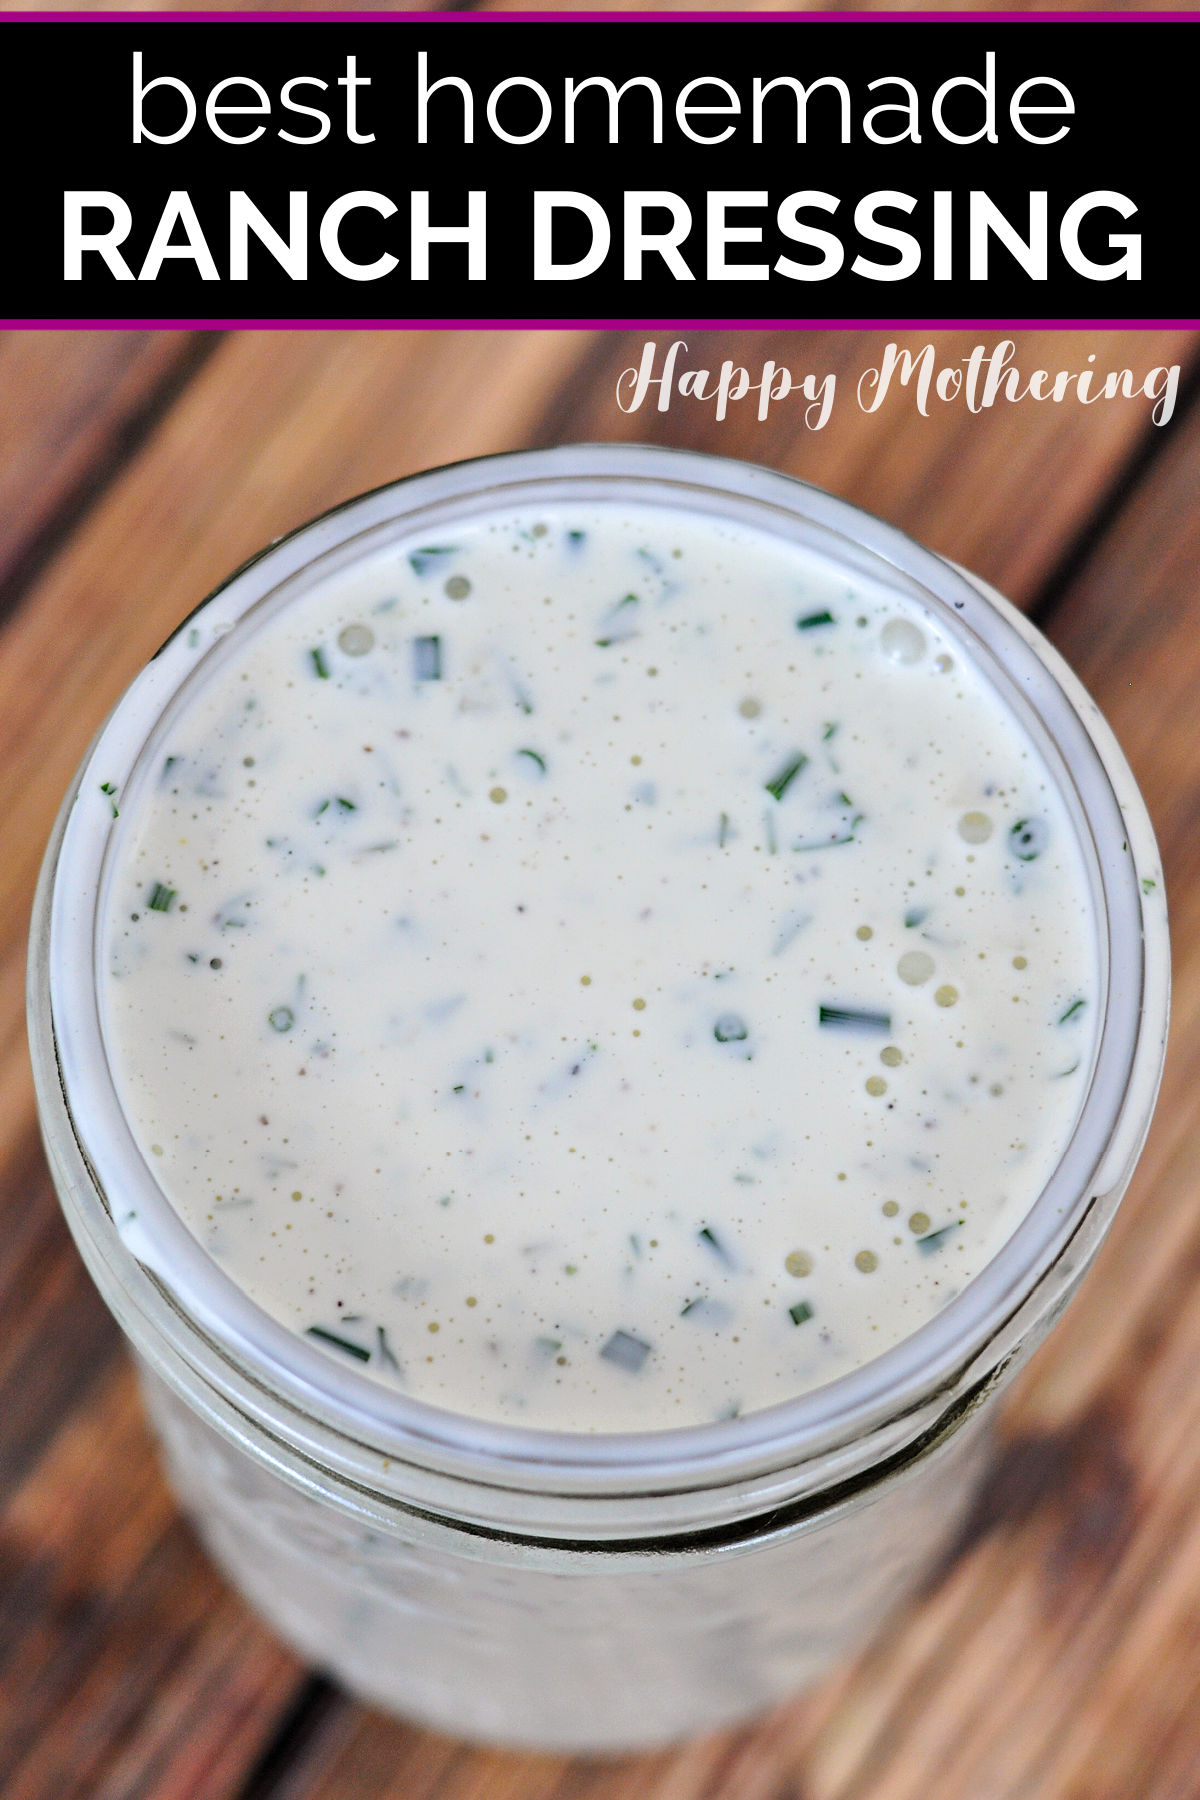 Are you looking for the best restaurant quality ranch dressing recipe that's better than Hidden Valley? Our healthier homemade Buttermilk Ranch Dressing is easy to make with fresh herbs or my dry spice mix.Â 